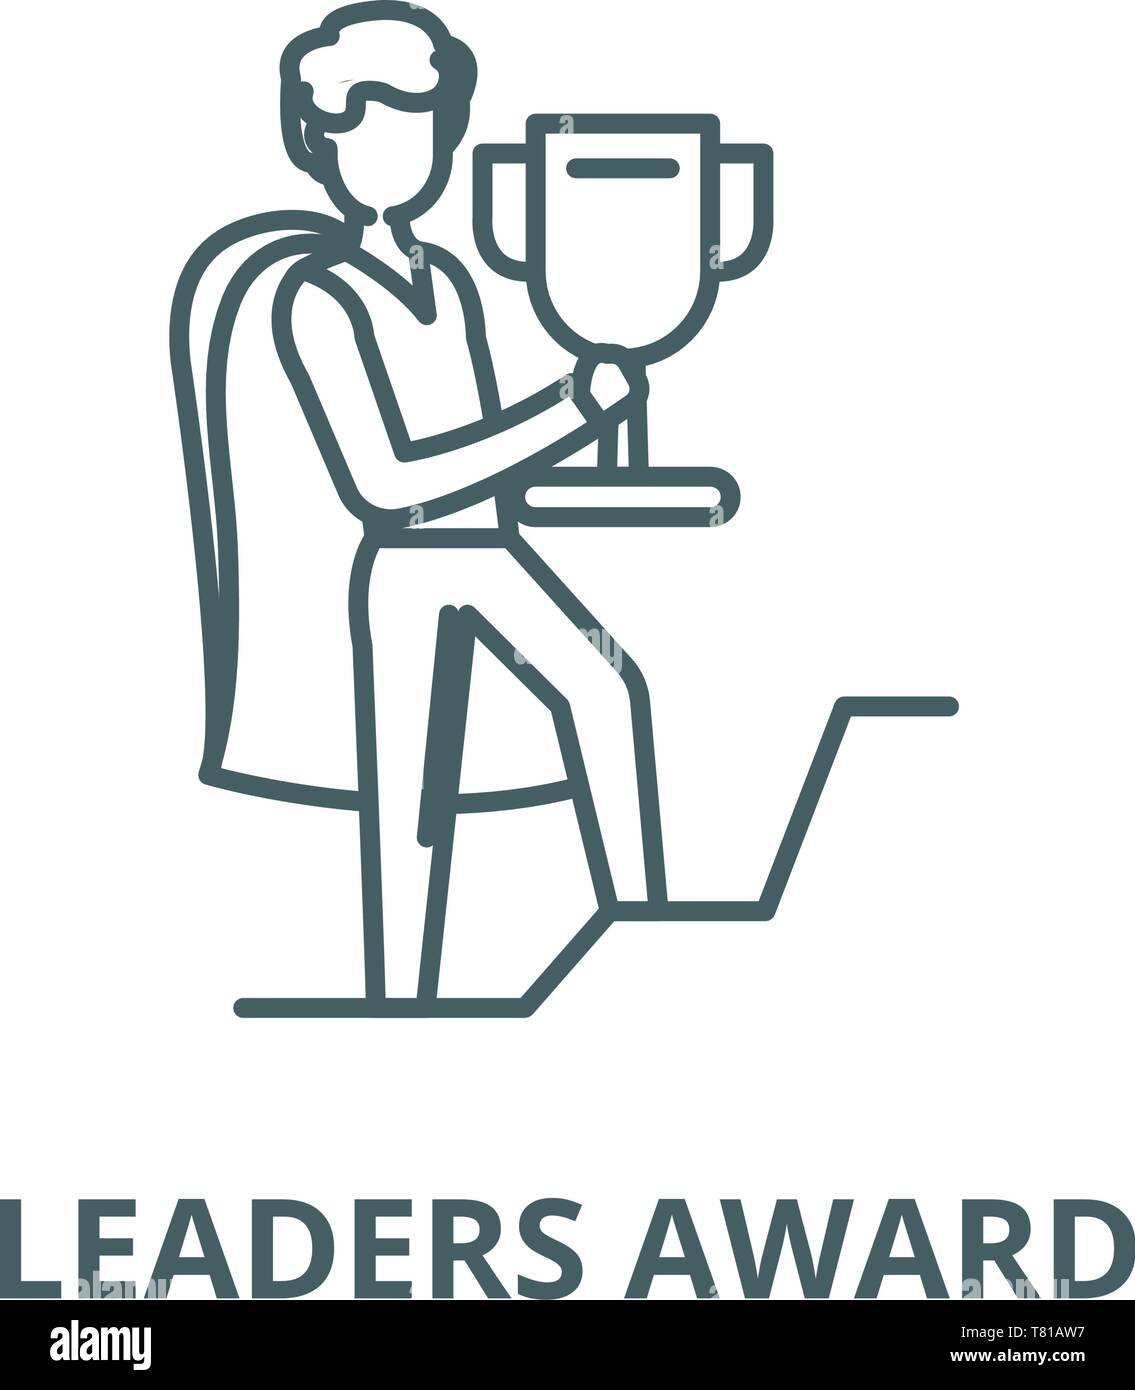 Leaders award vector line icon, linear concept, outline sign, symbol Stock Vector